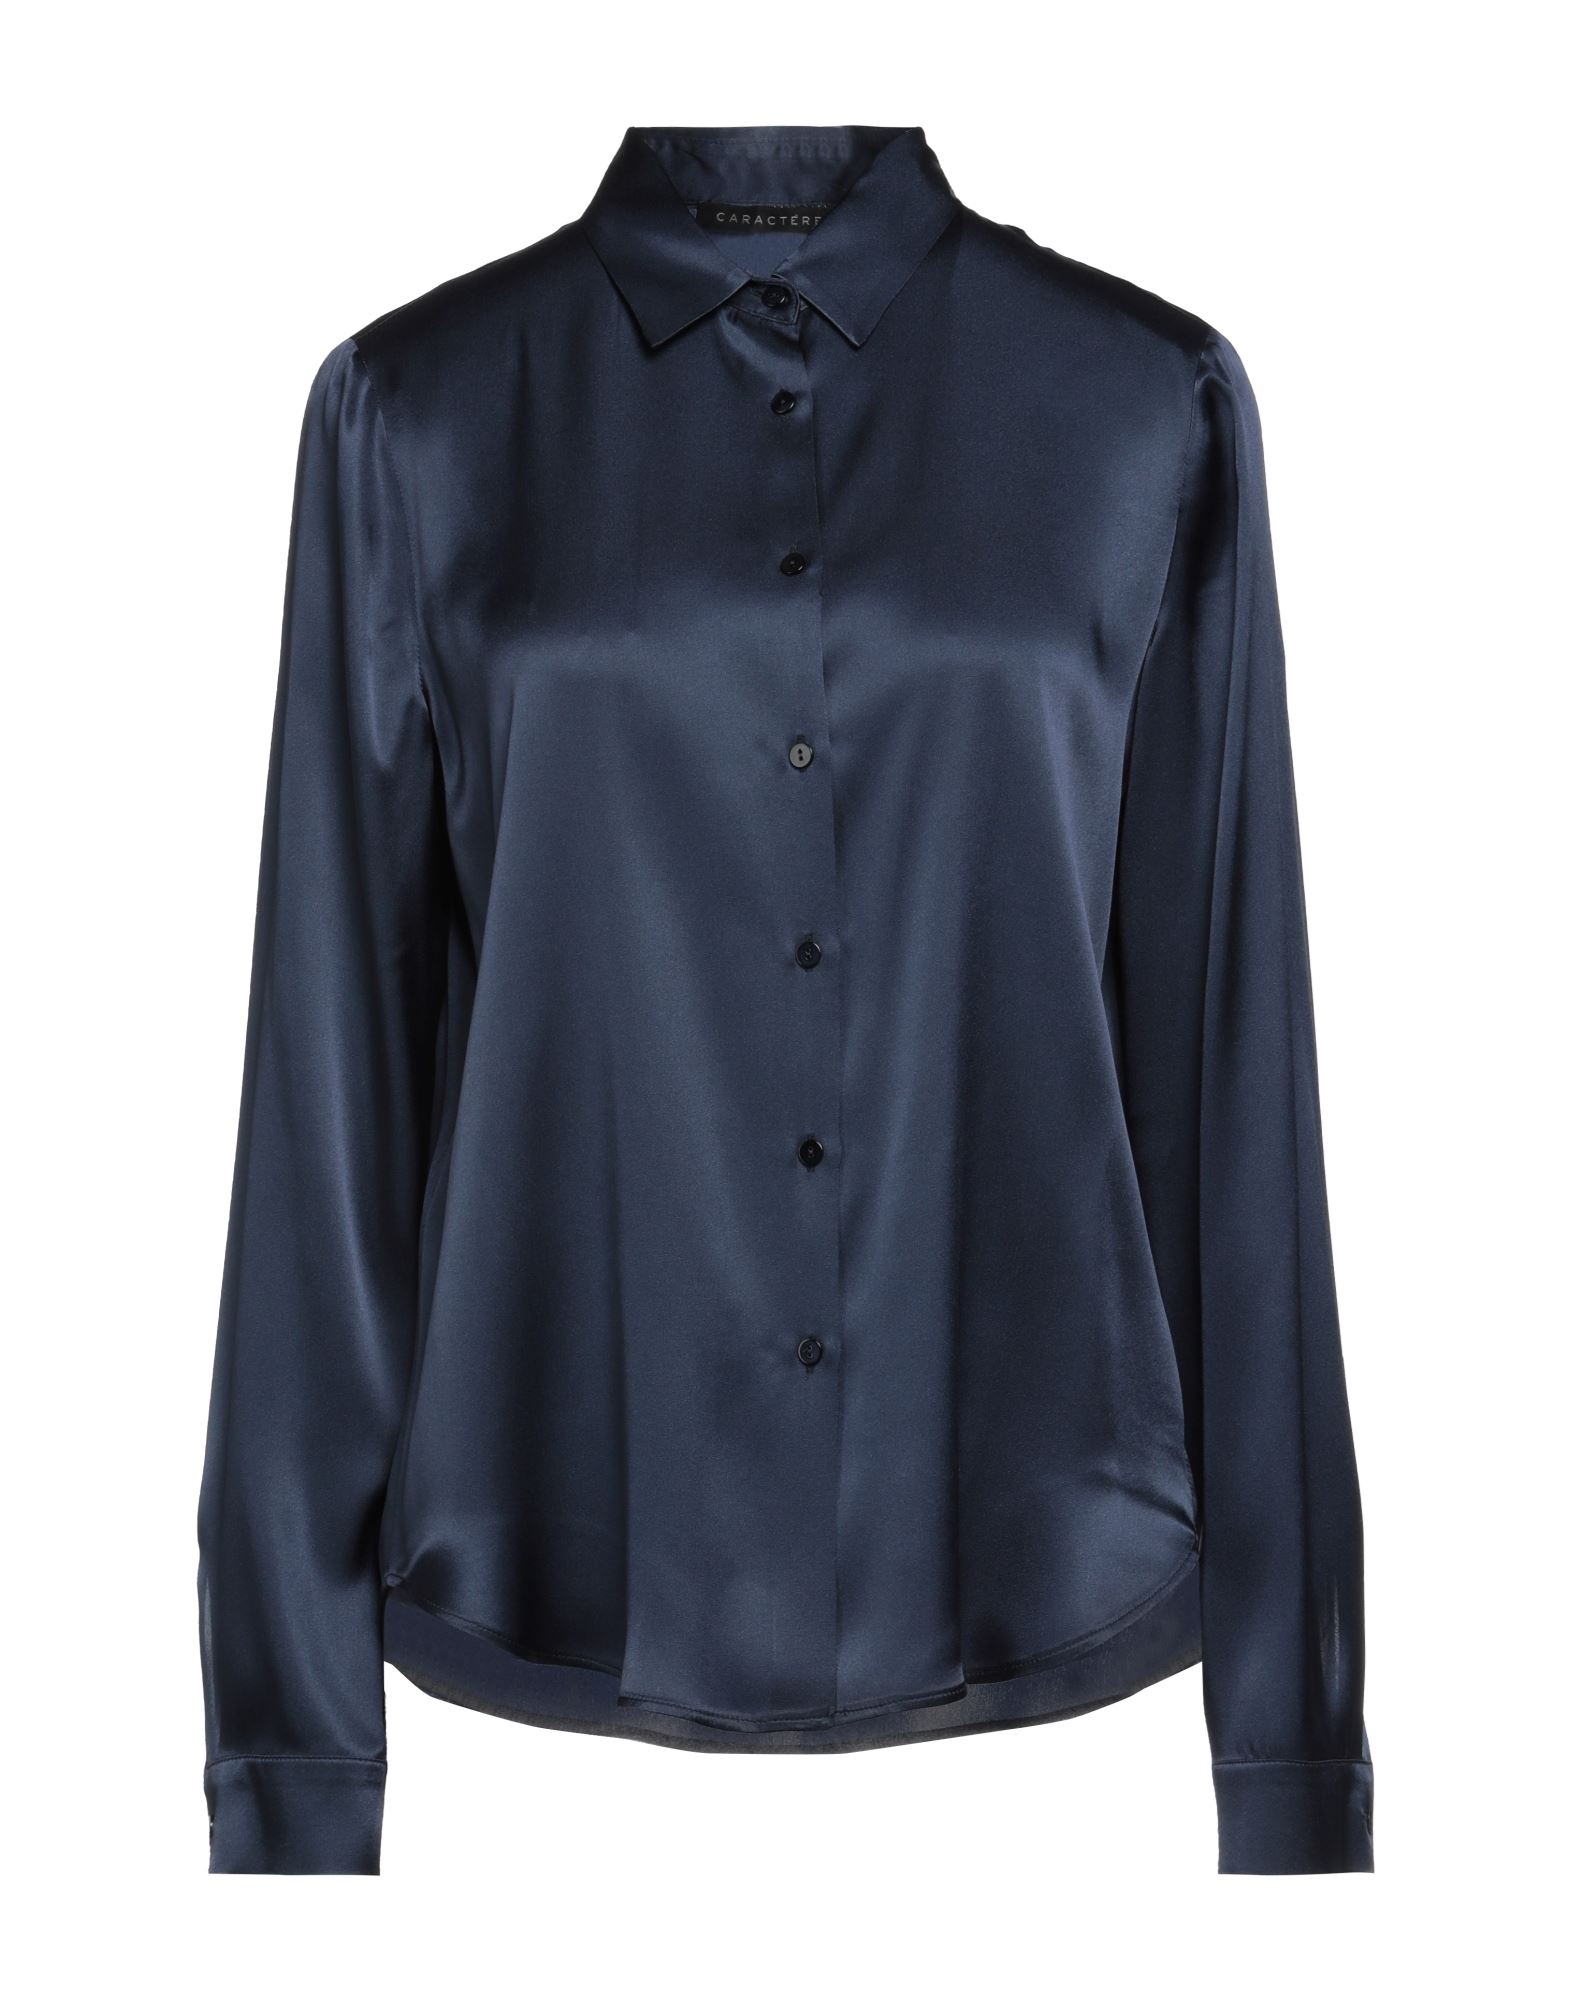 Caractere Shirts In Navy Blue